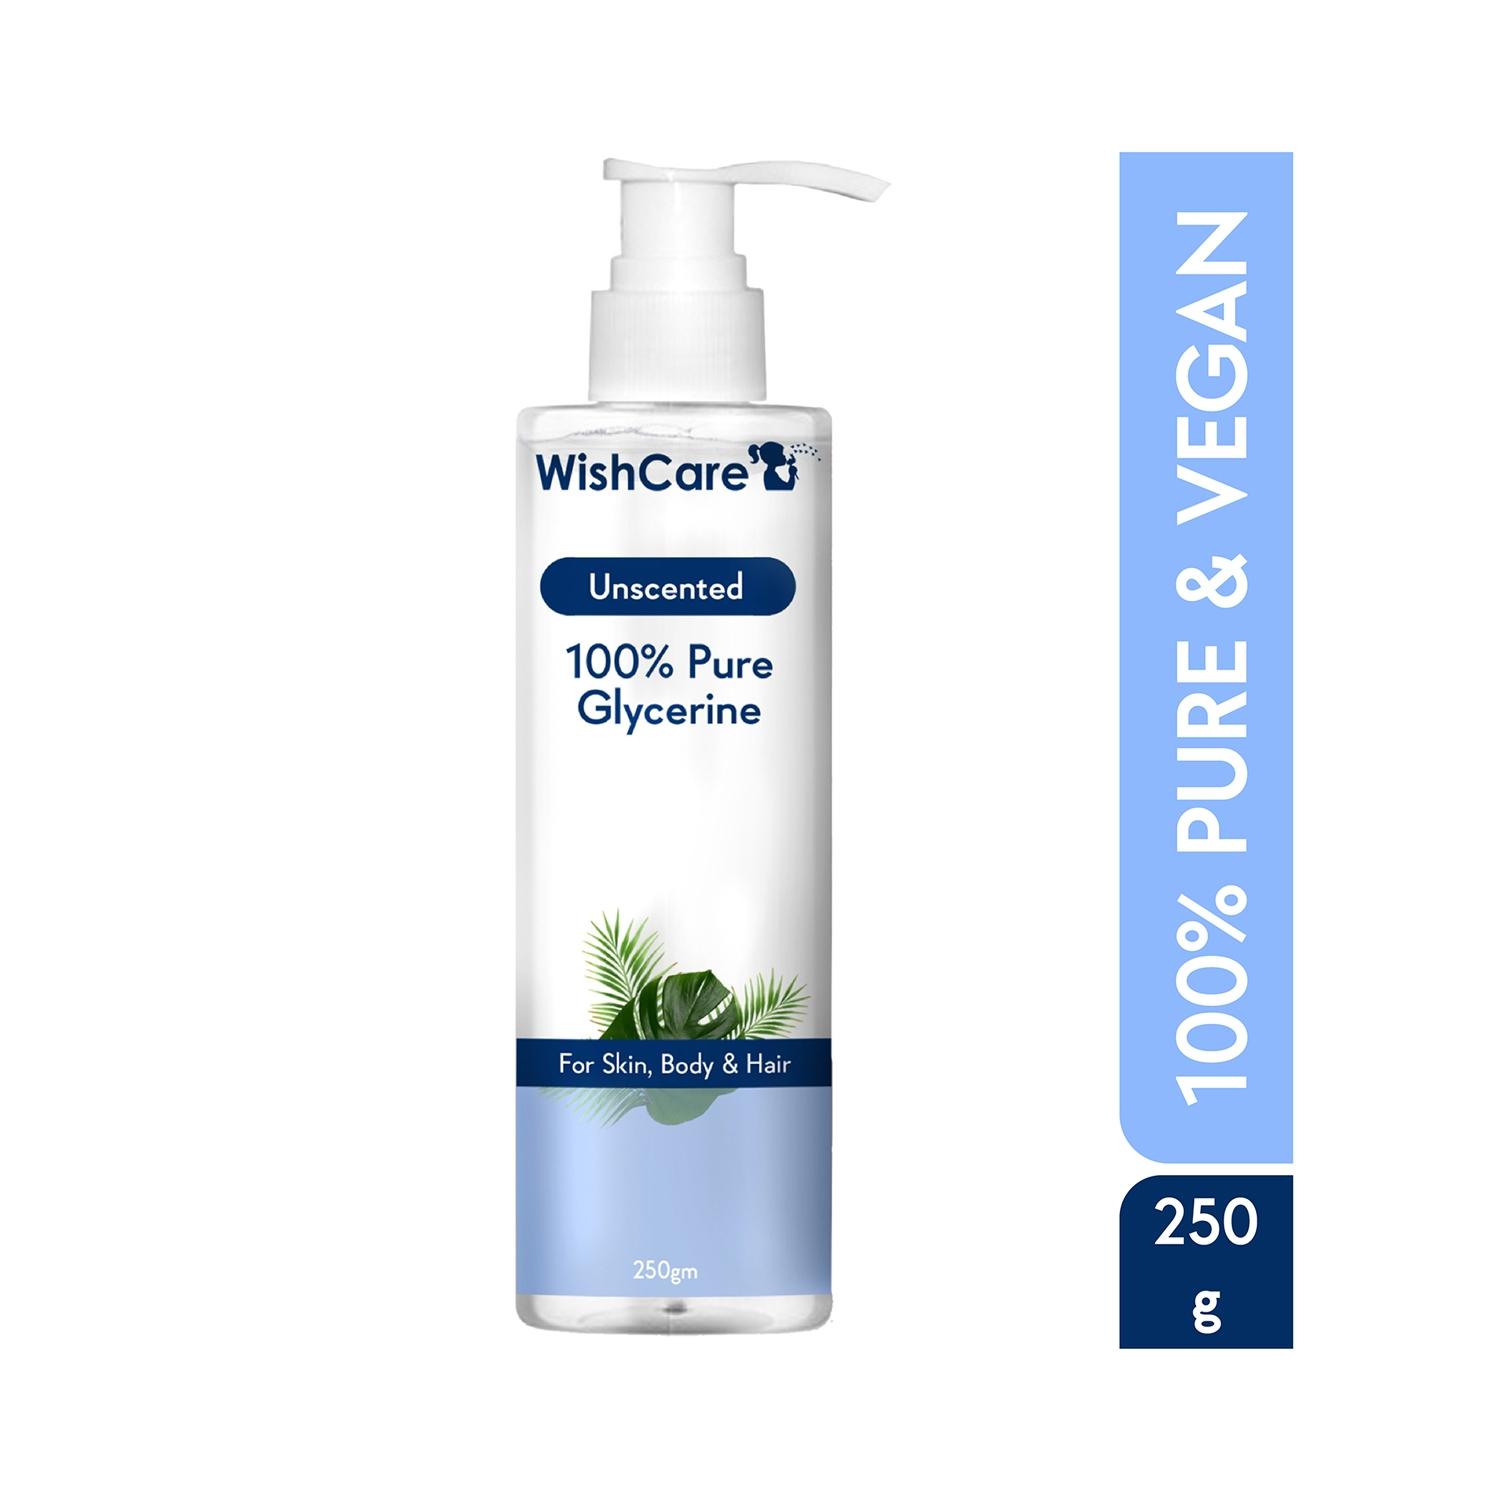 wishcare pure & unscented glycerin (250g)